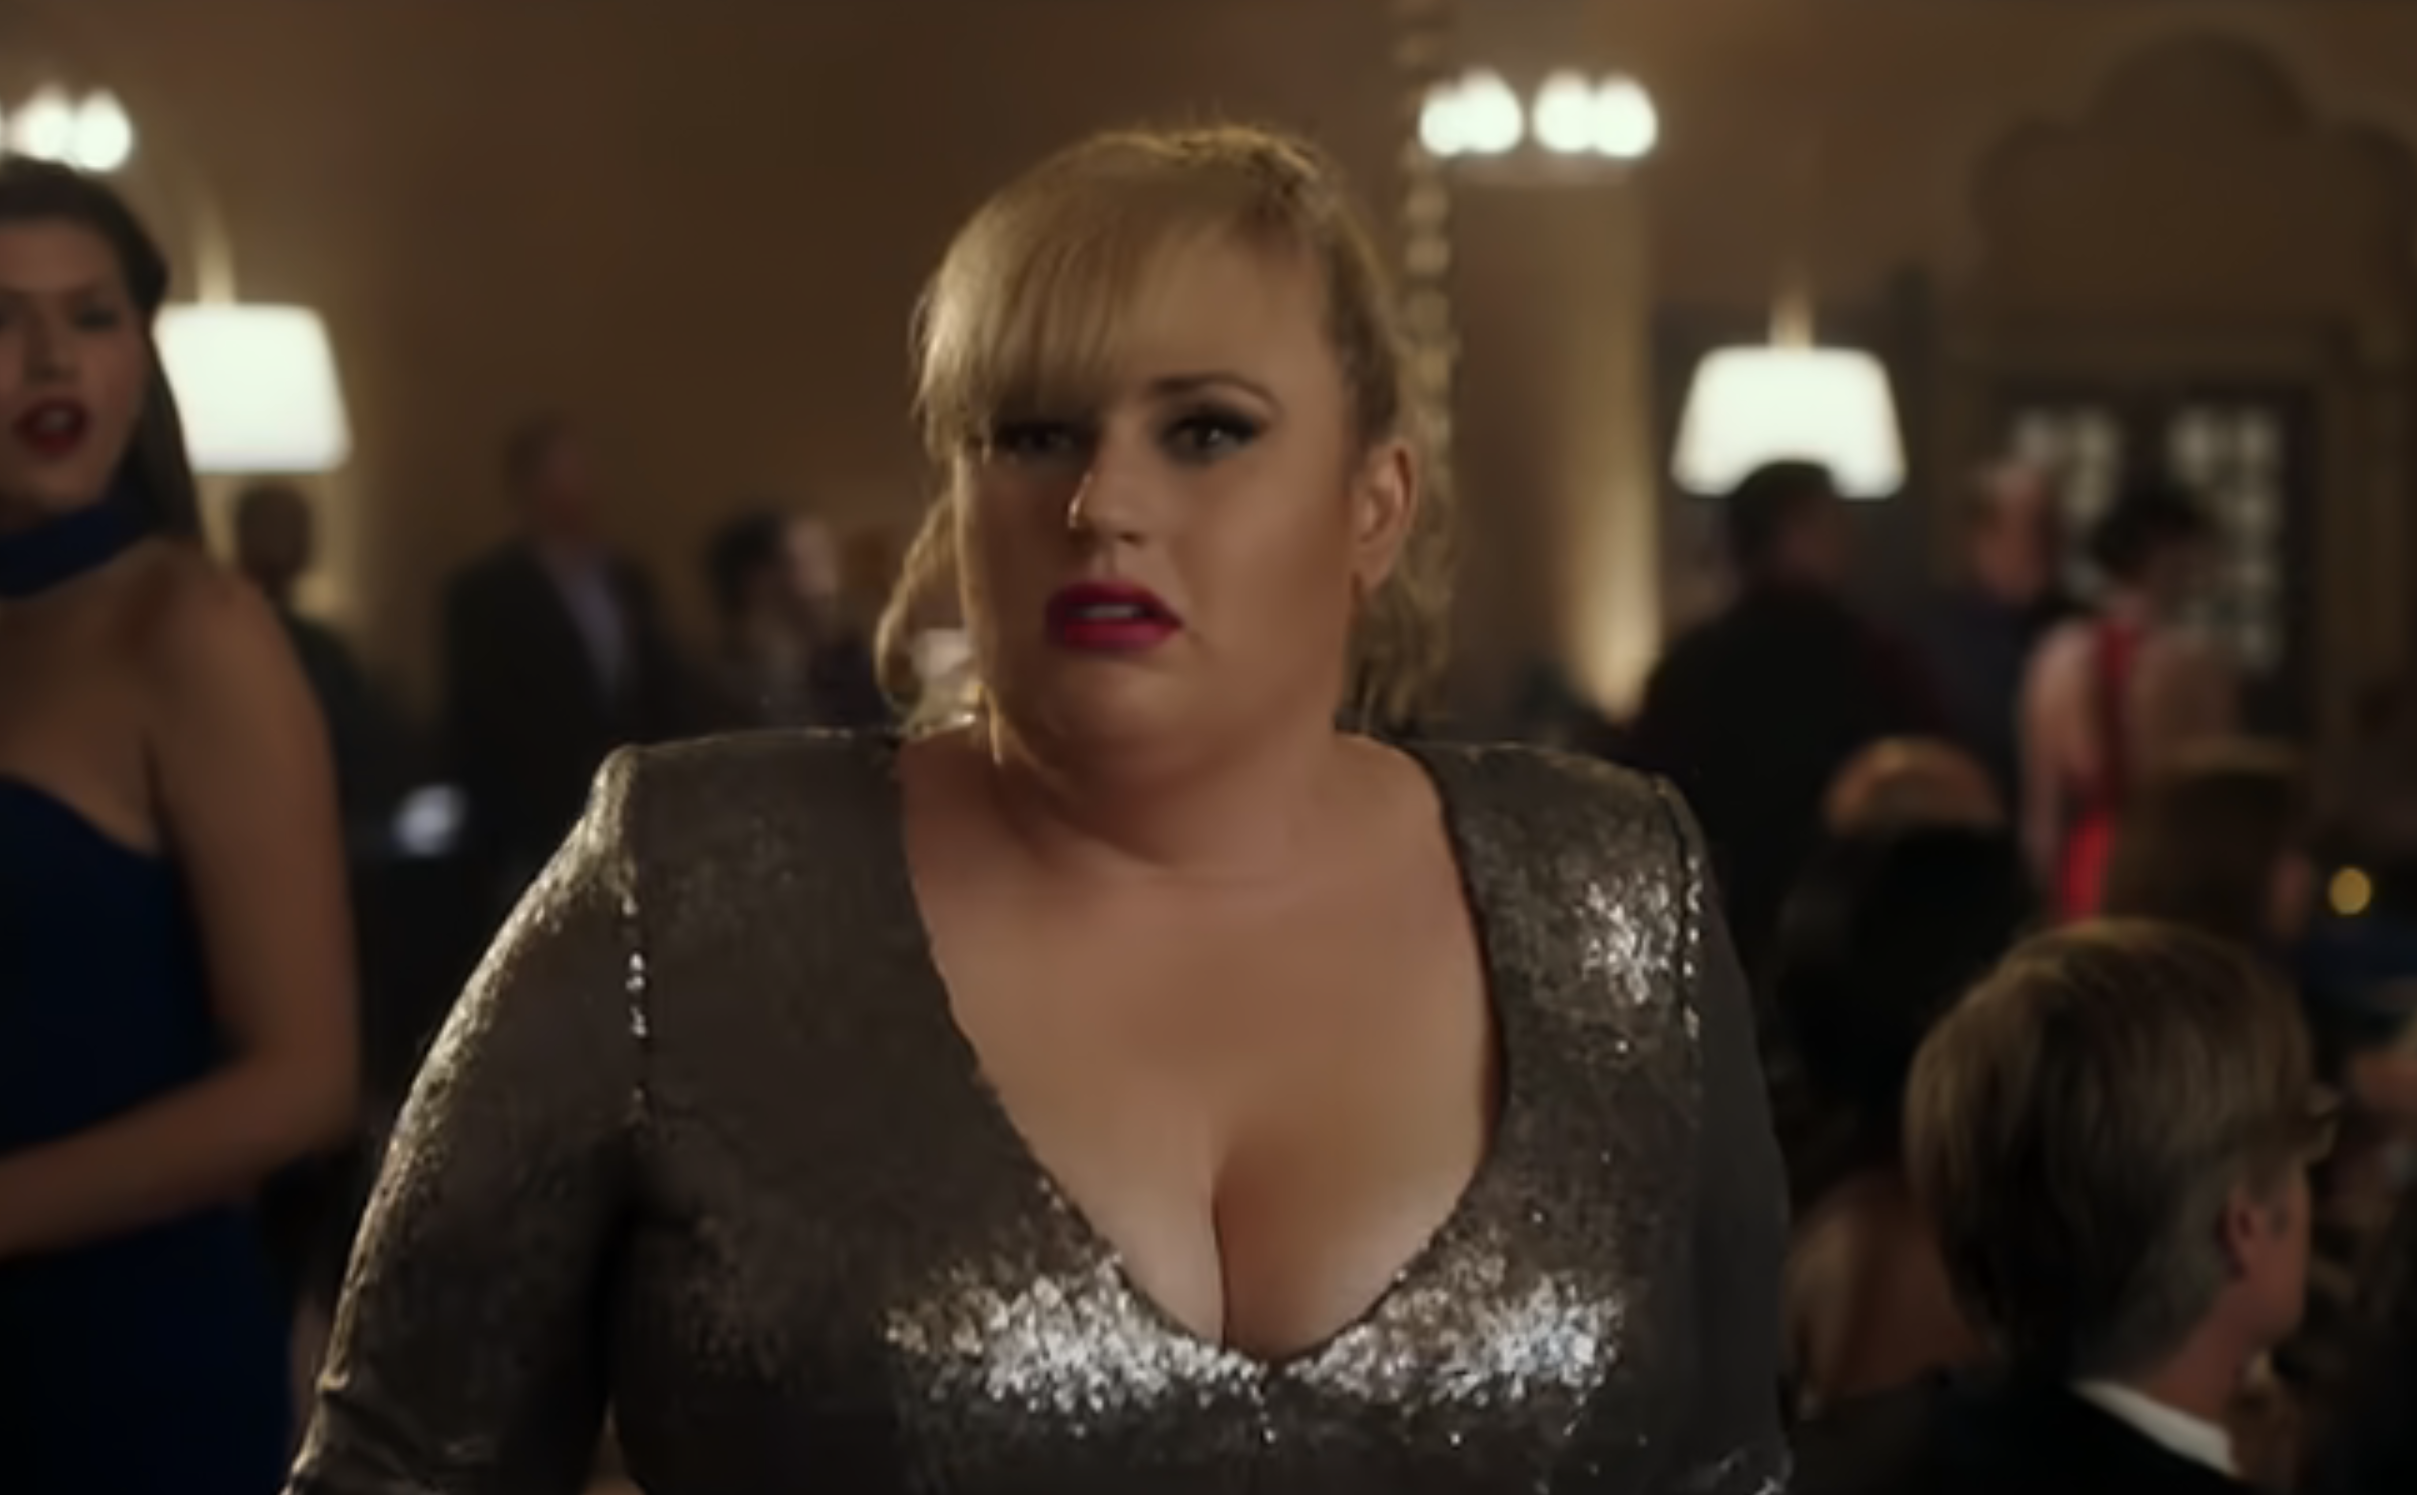 Rebel Wilson in a glittery V-neck dress at a formal event, looking surprised